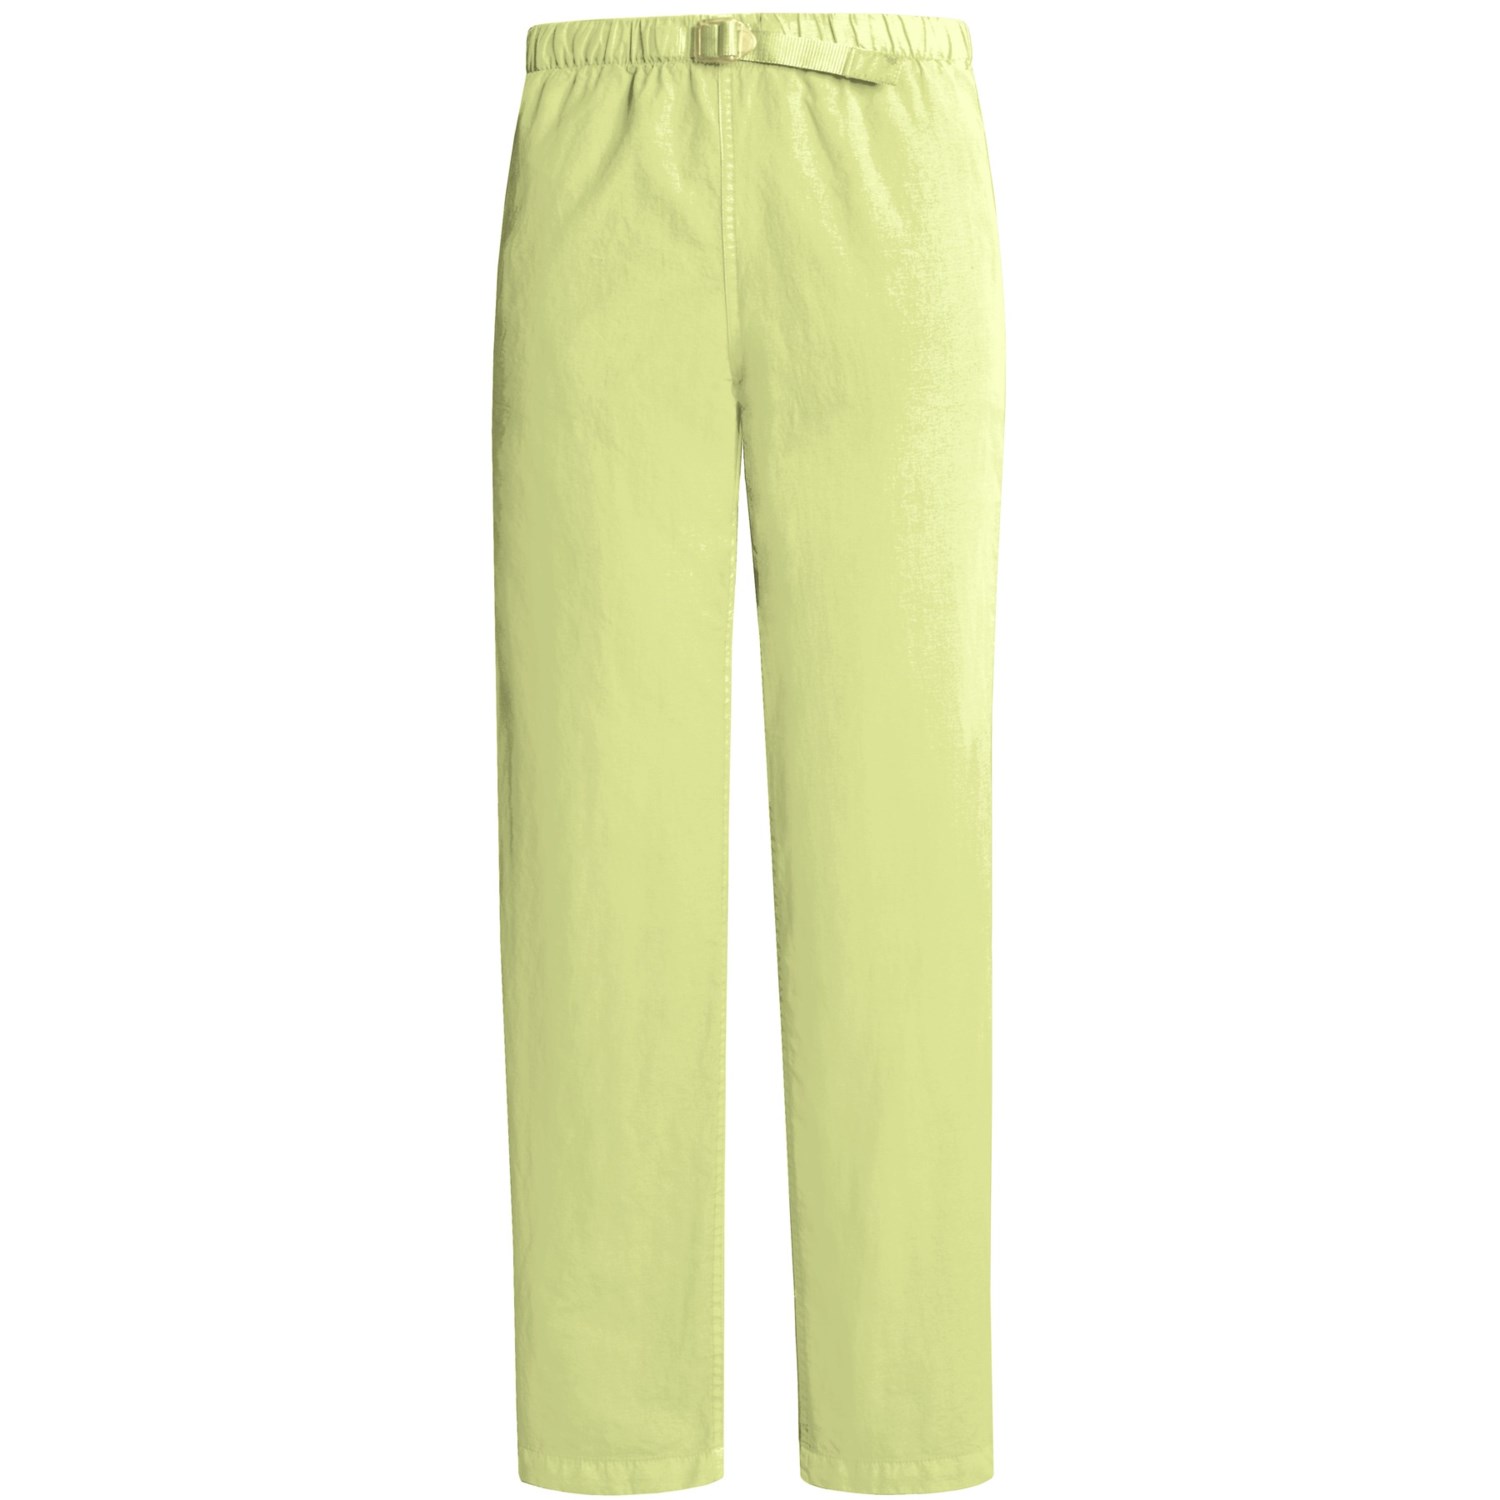 Gramicci Original G Pants   Quick Dry (For Women) in Light Yellow 